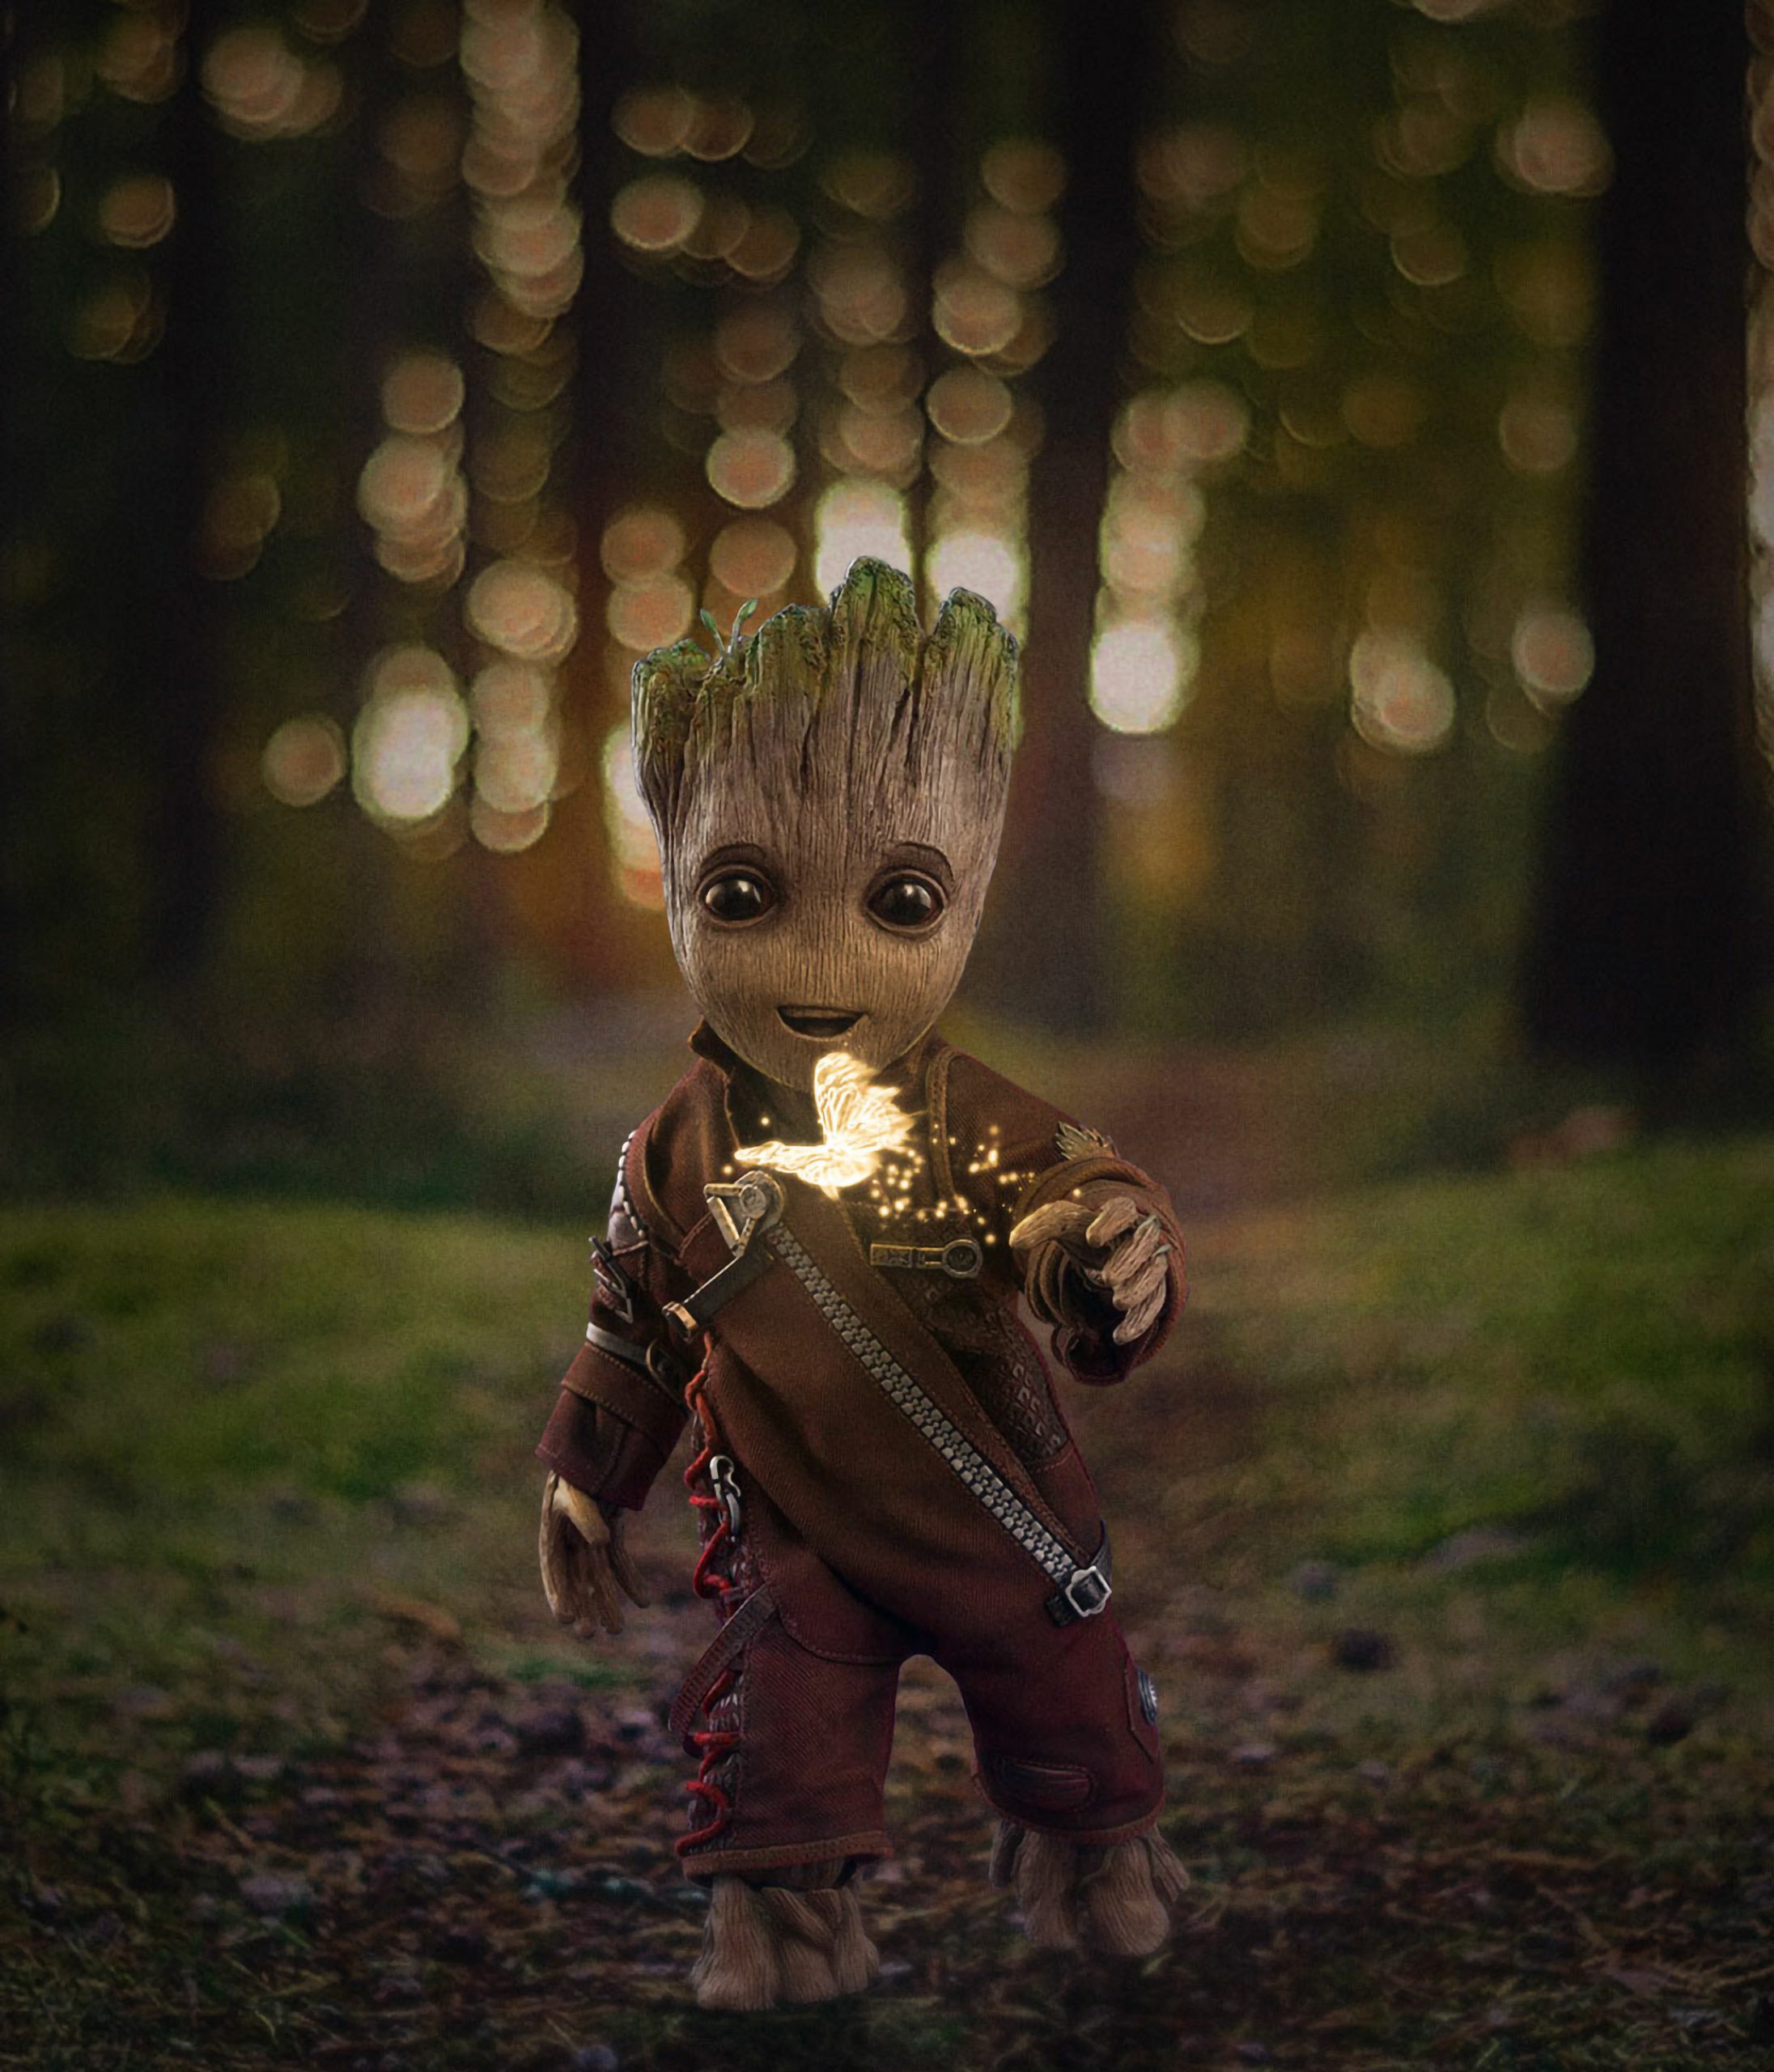 Groot Captions And Quotes For Instagram